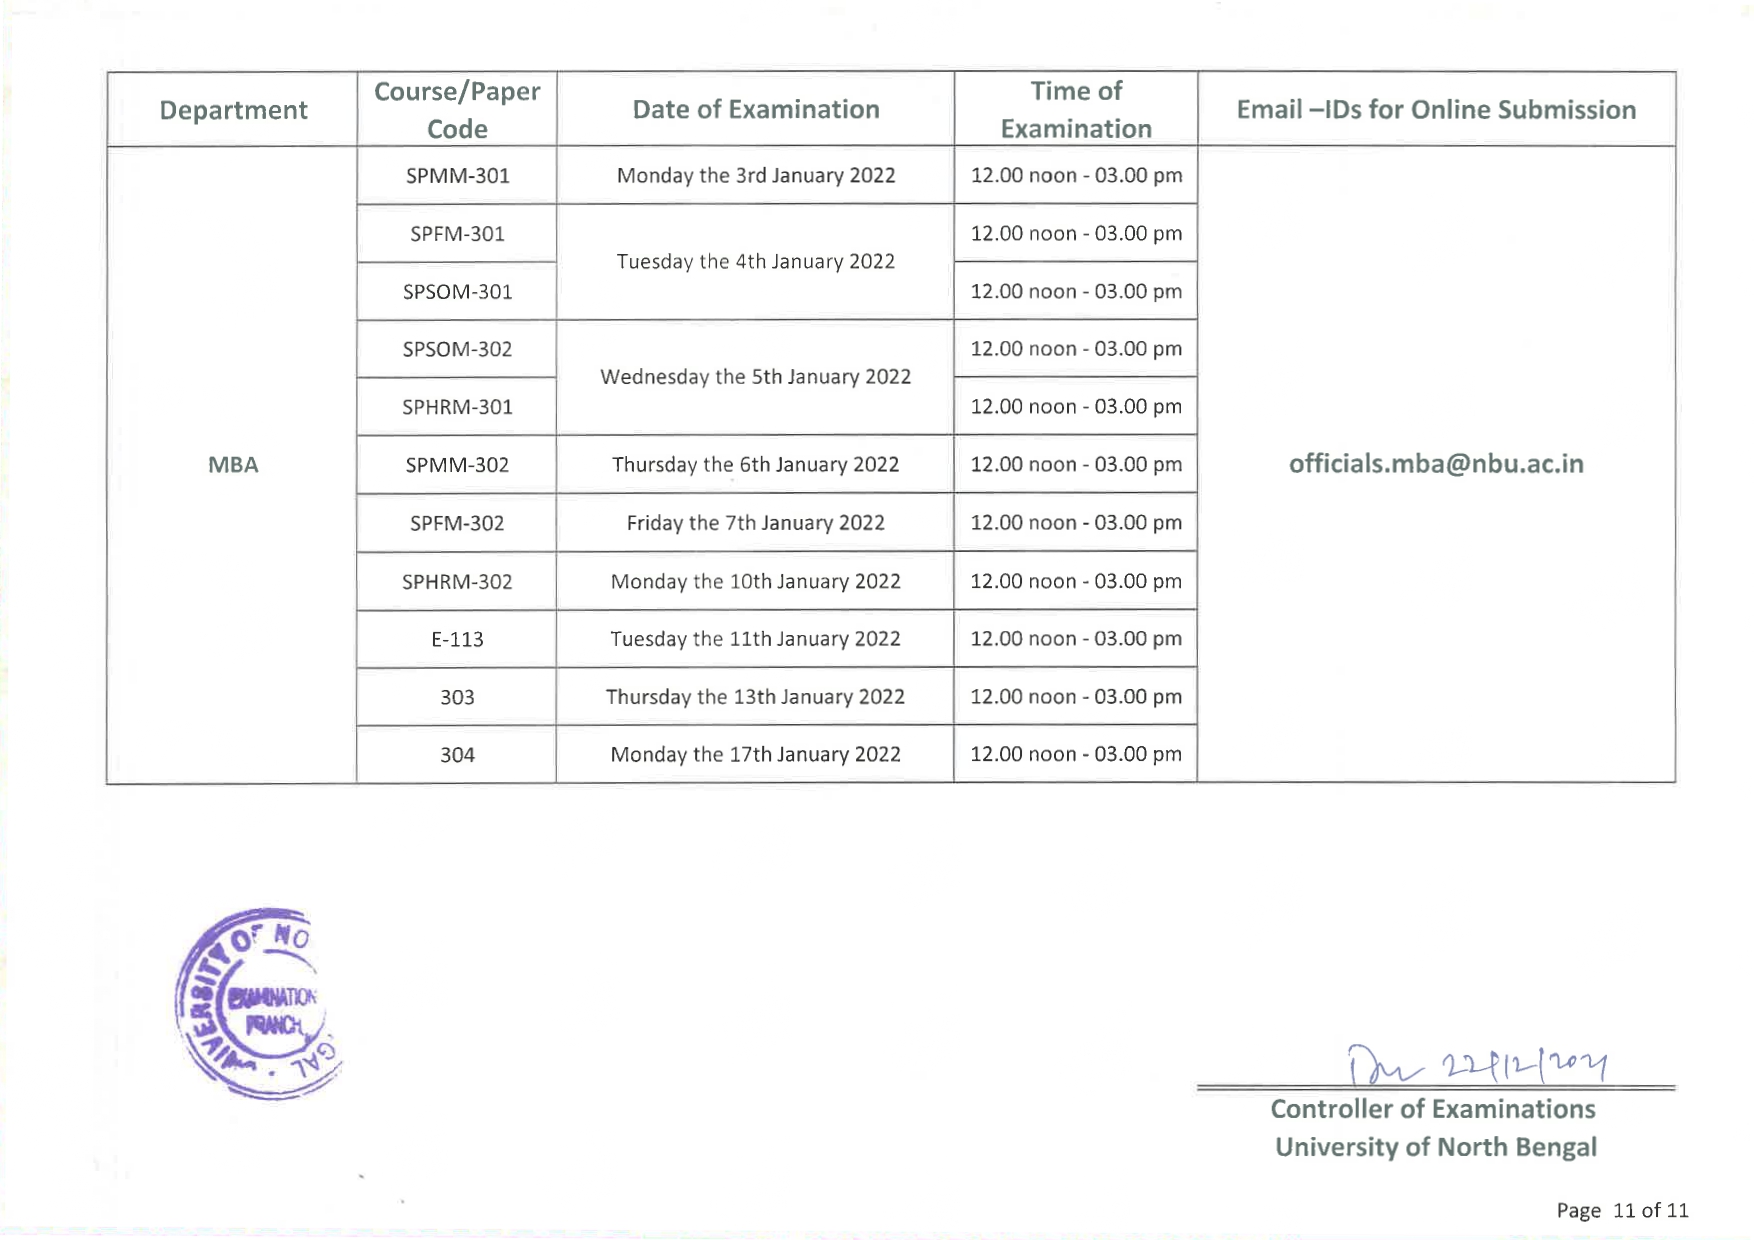 EXAM SCHEDULE FOR LL.M SEMESTER III (PAGE 11)